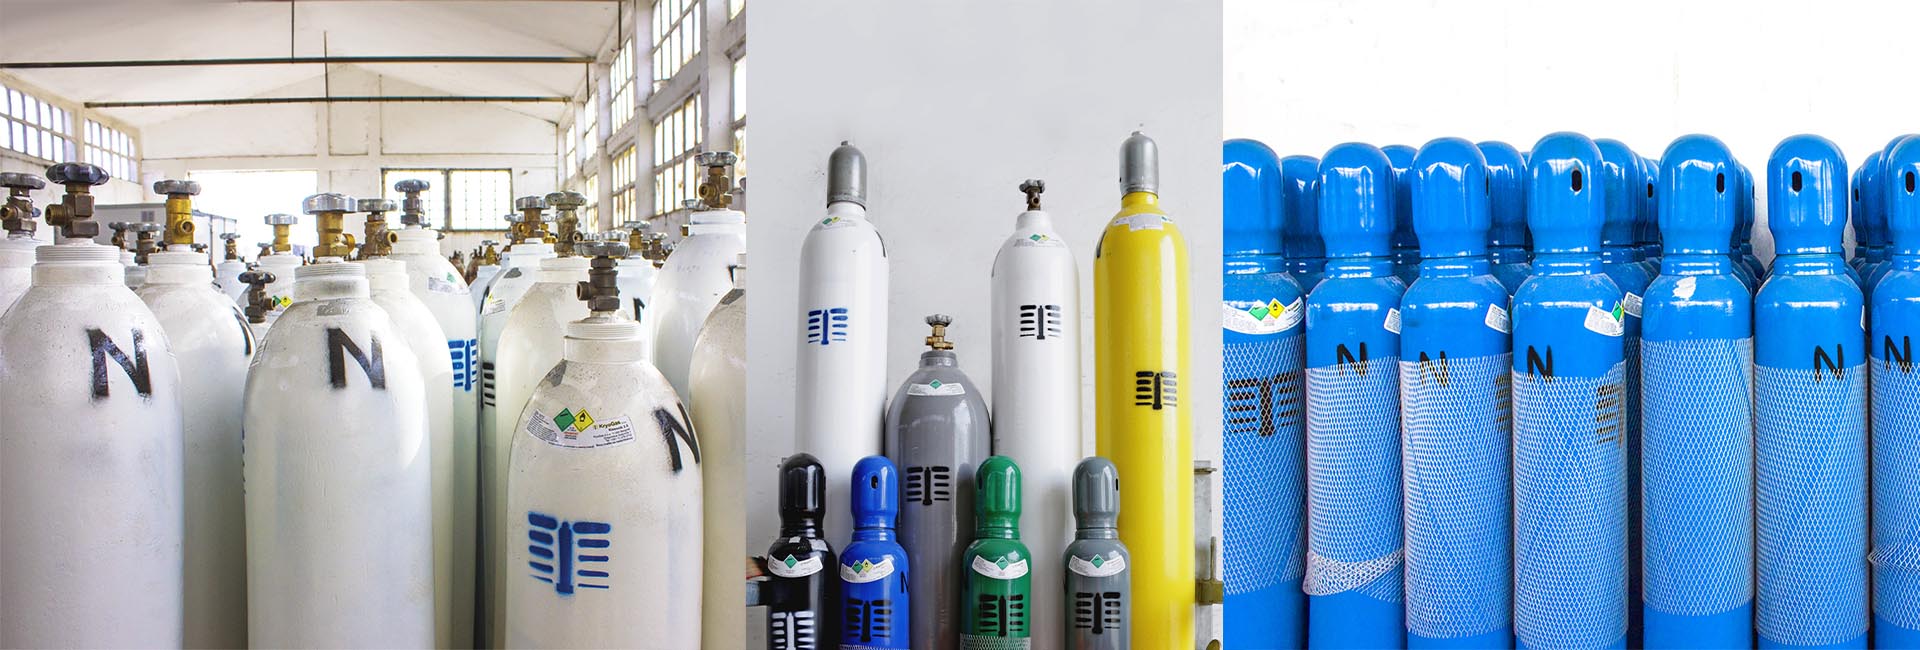 Technical gases cng methane pumps KryoGas